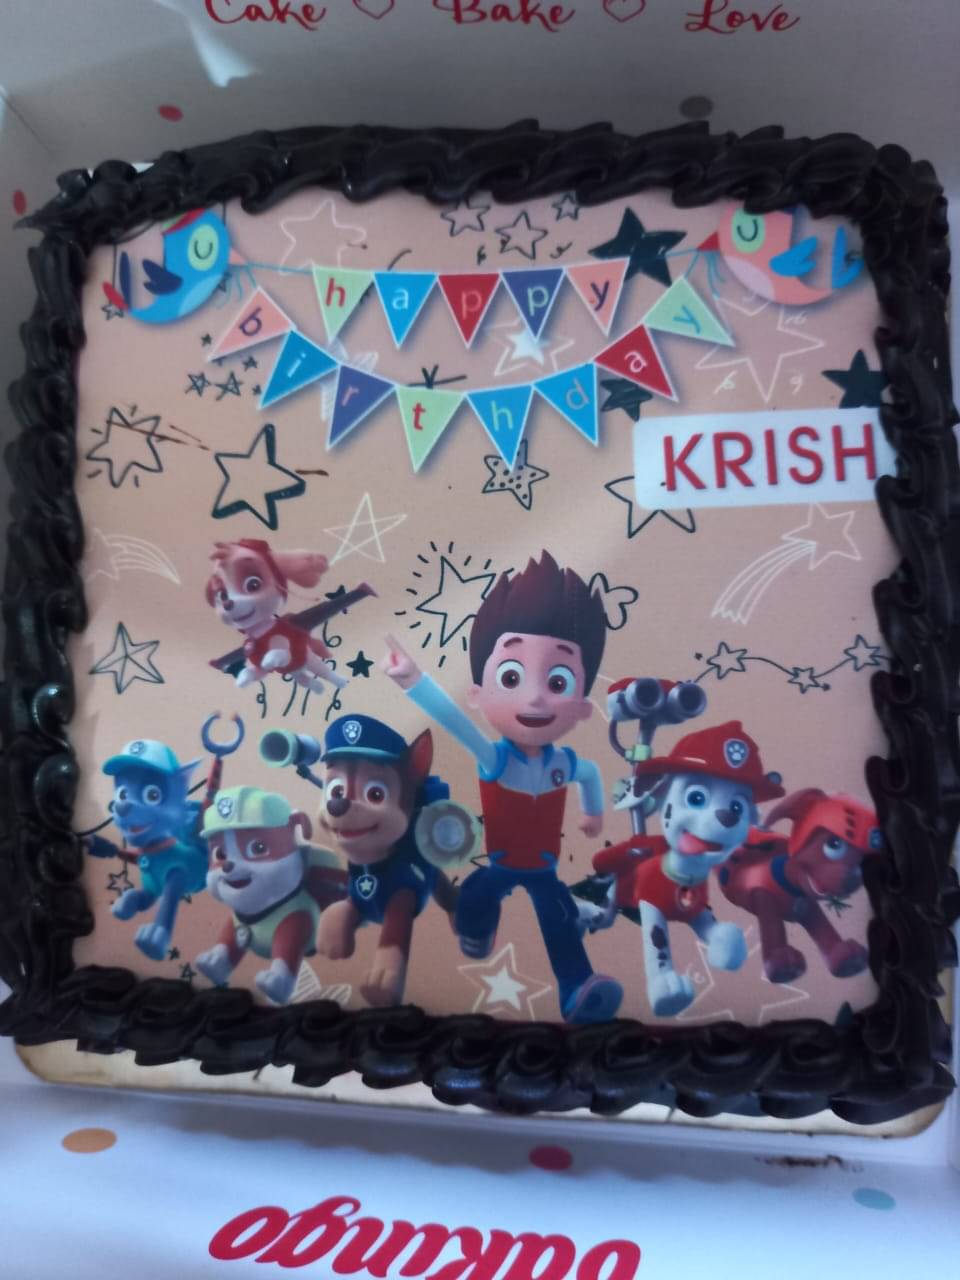 All Review & Ratings of Paw Patrol Bday Cake